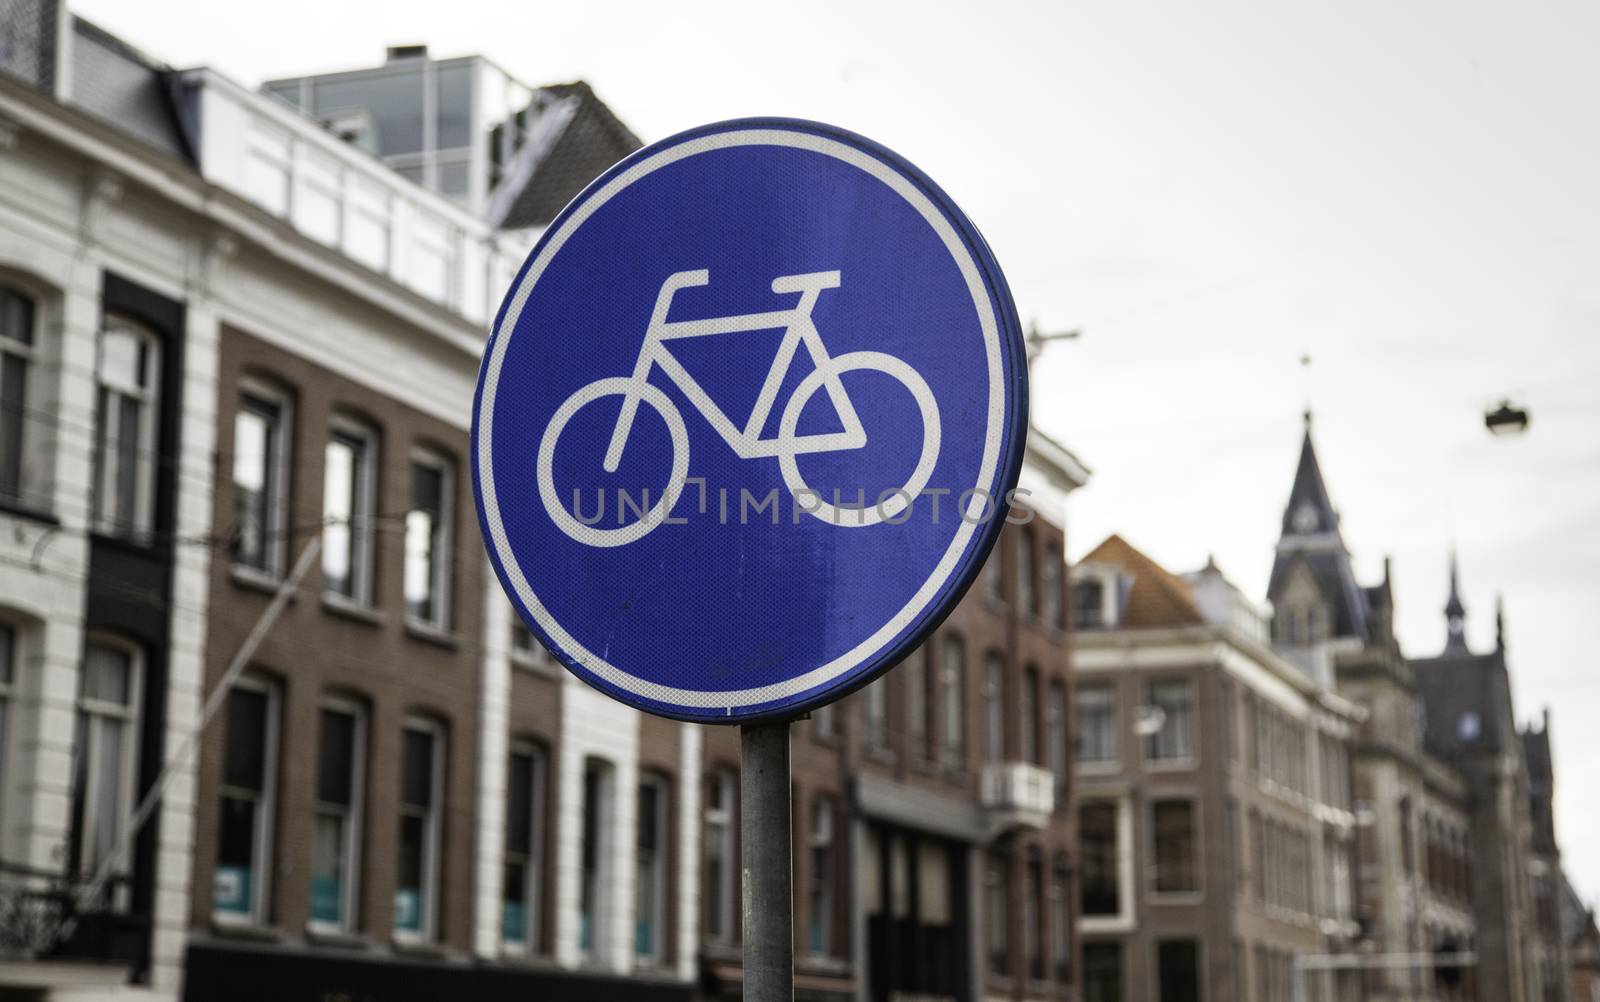 Bicycle sign with arrow, detail of information, transport